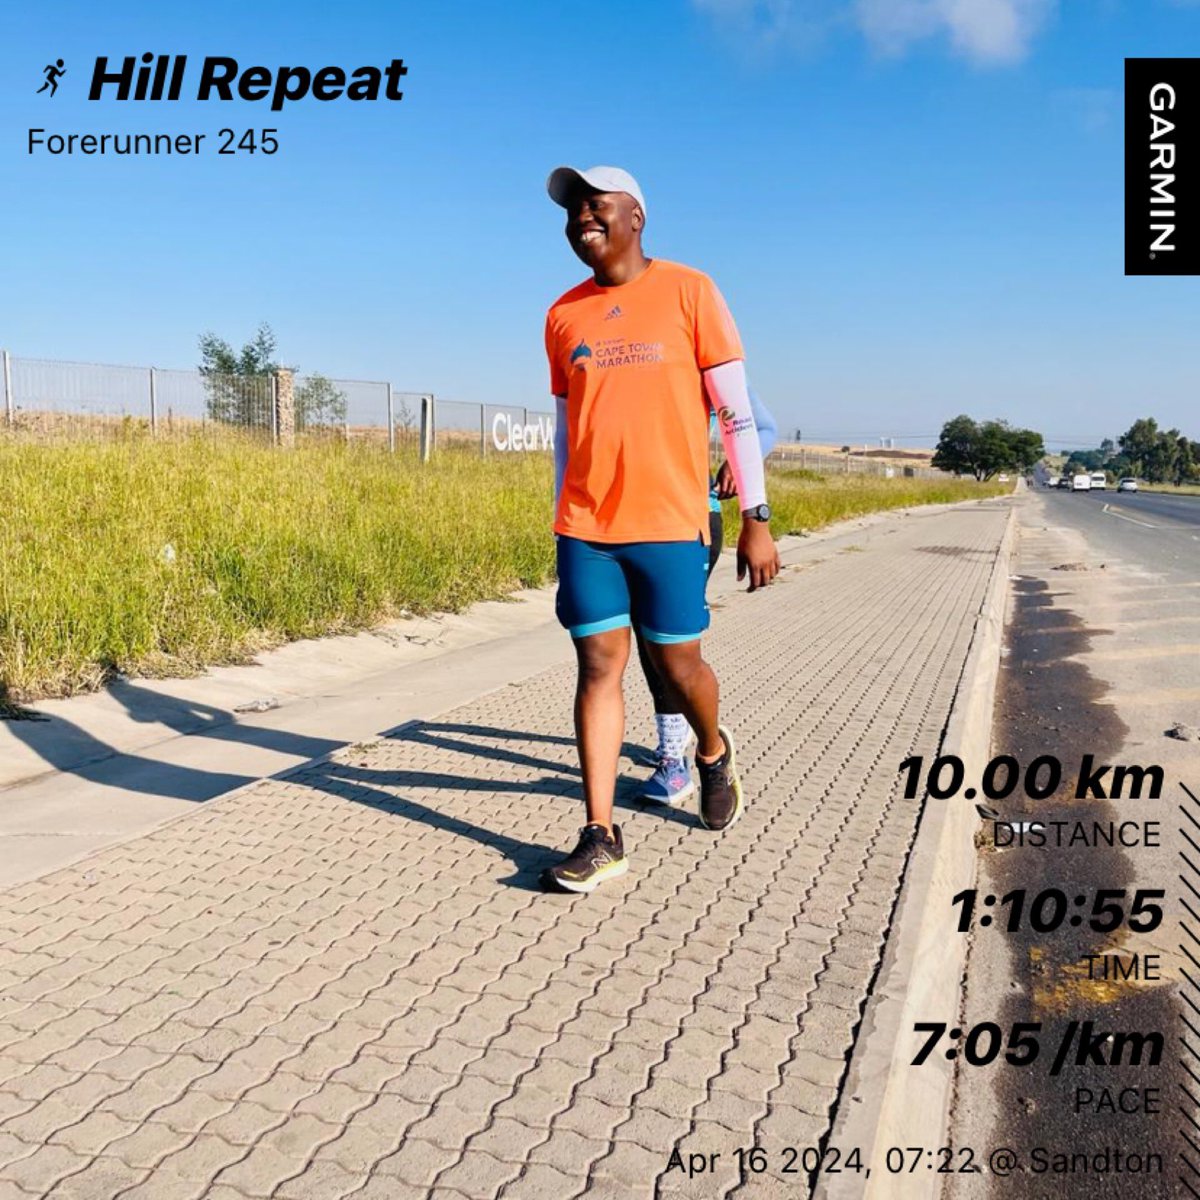 Hill Repeats: 3km WU
400m x 6 hills repeat 
2km CD #WaterfallAC #FetchYourBody2024 #RunningWithTumiSole